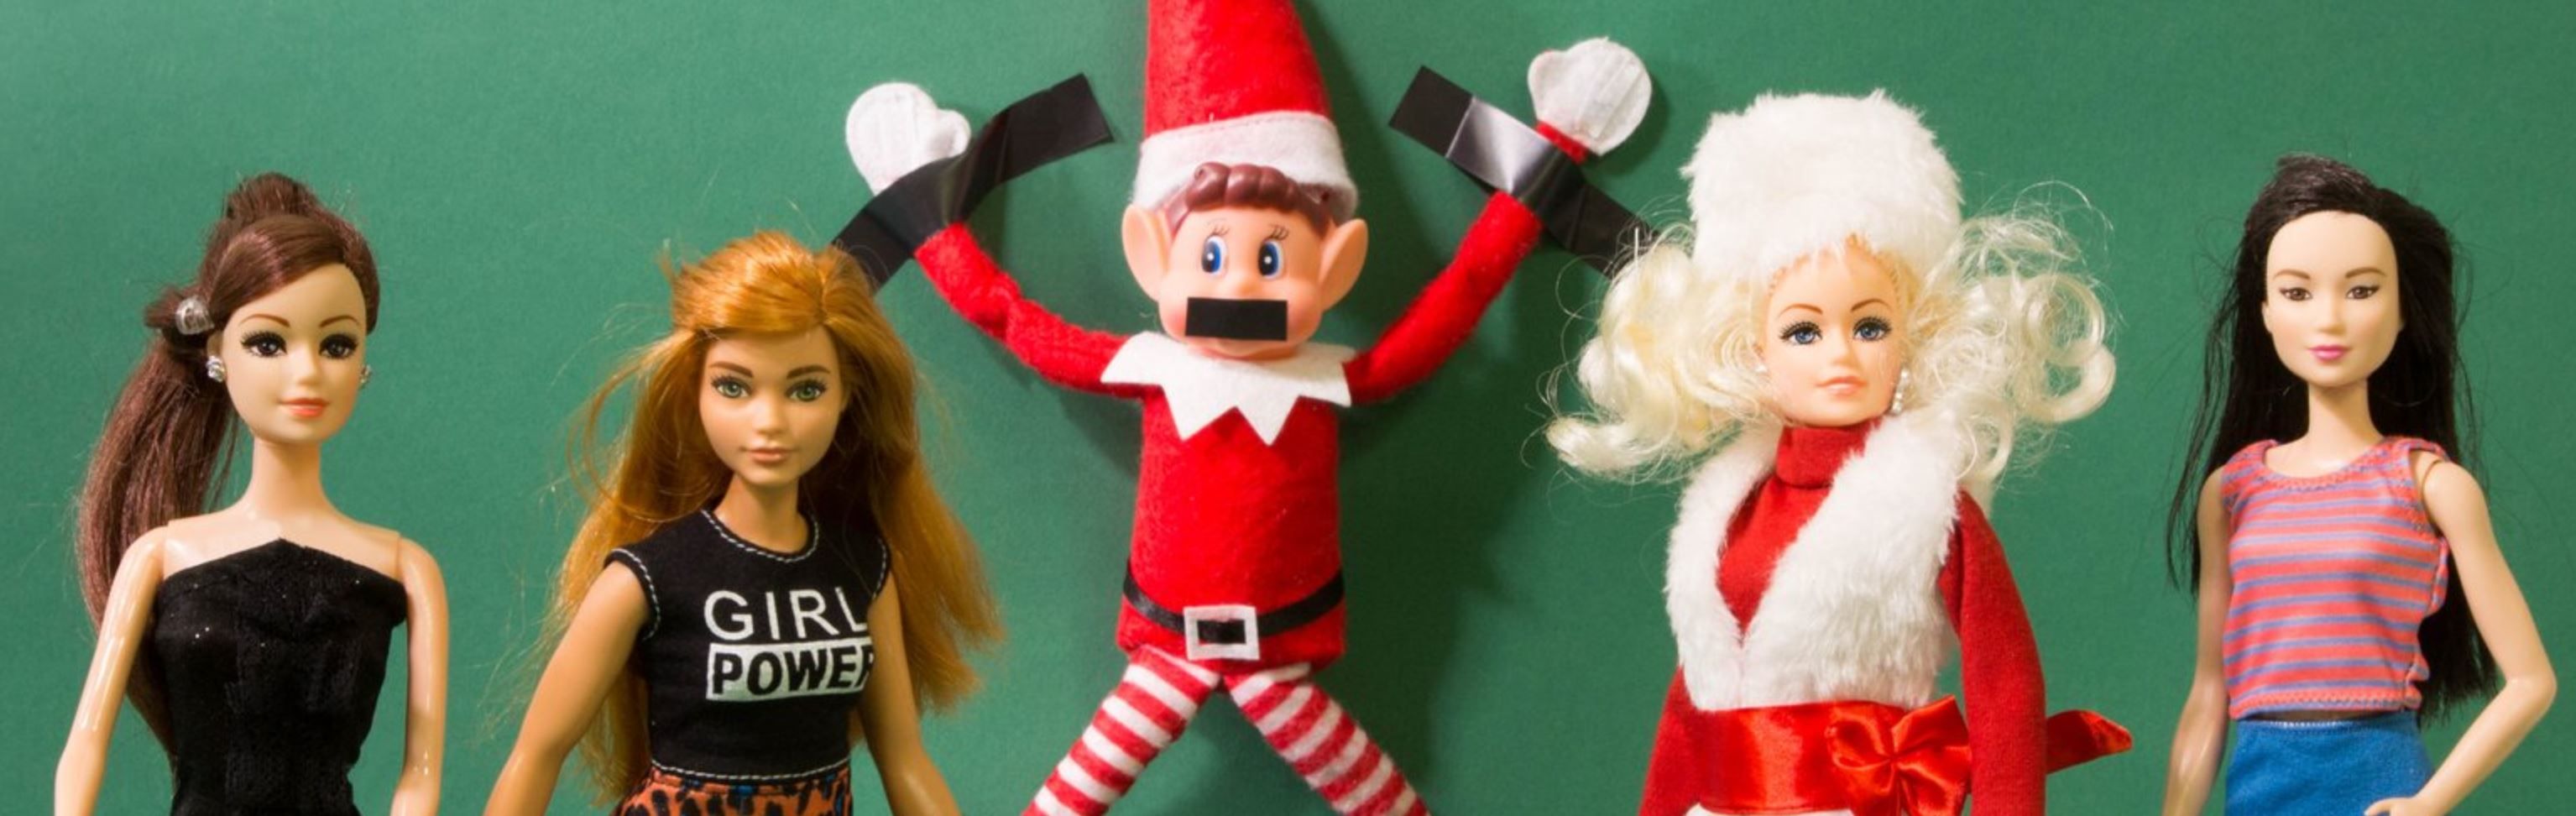 Has the Naughty Elf gone too far – where is the line in social campaigns